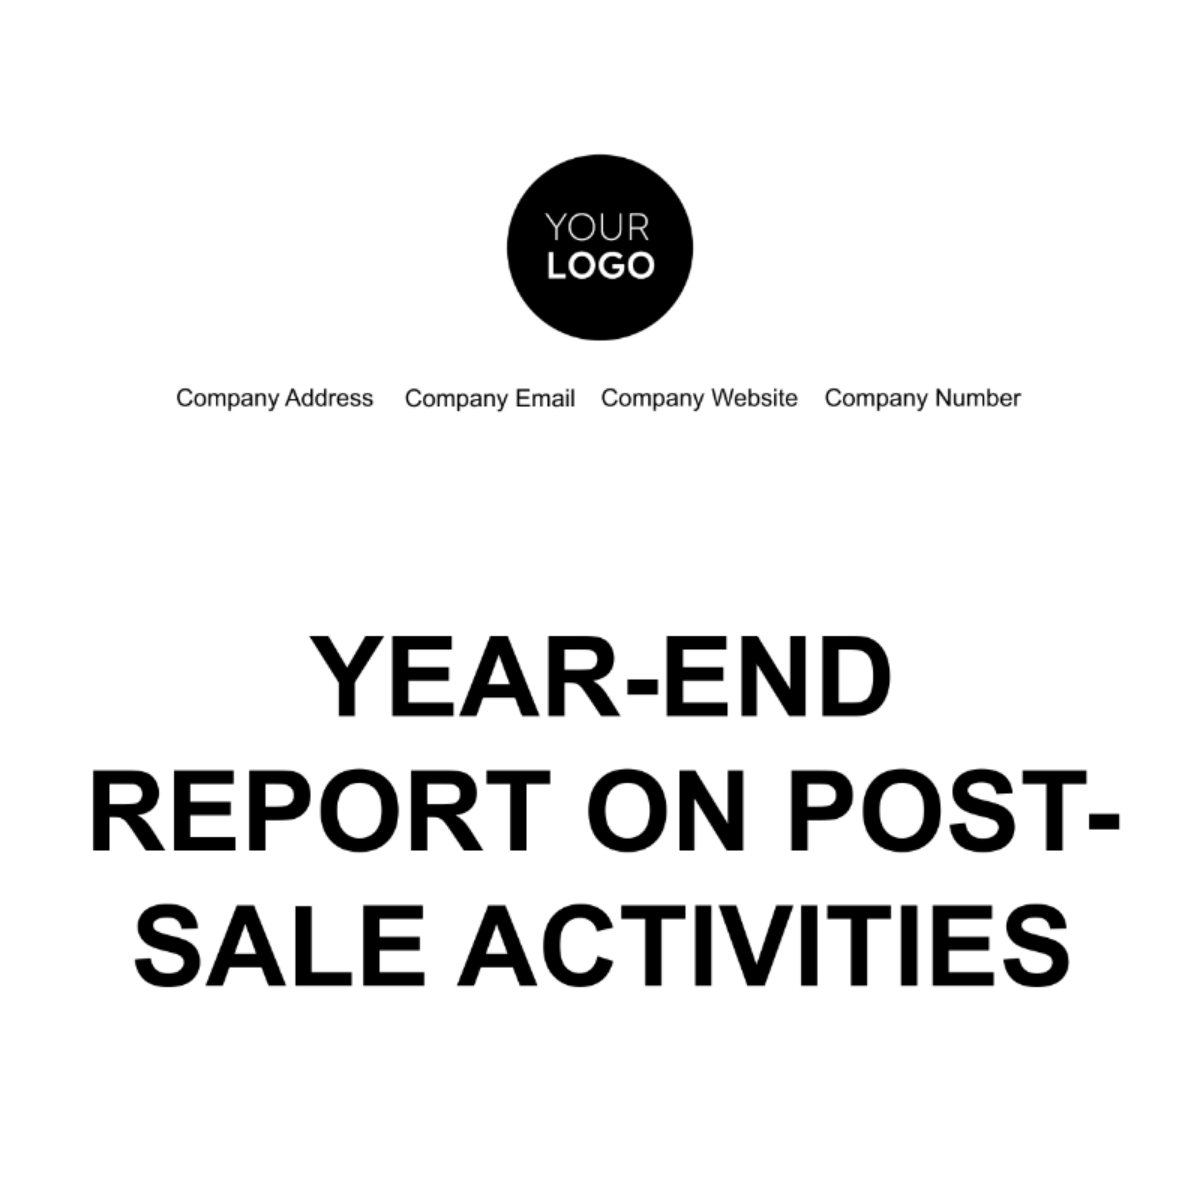 Year-end Report on Post-Sale Activities Template